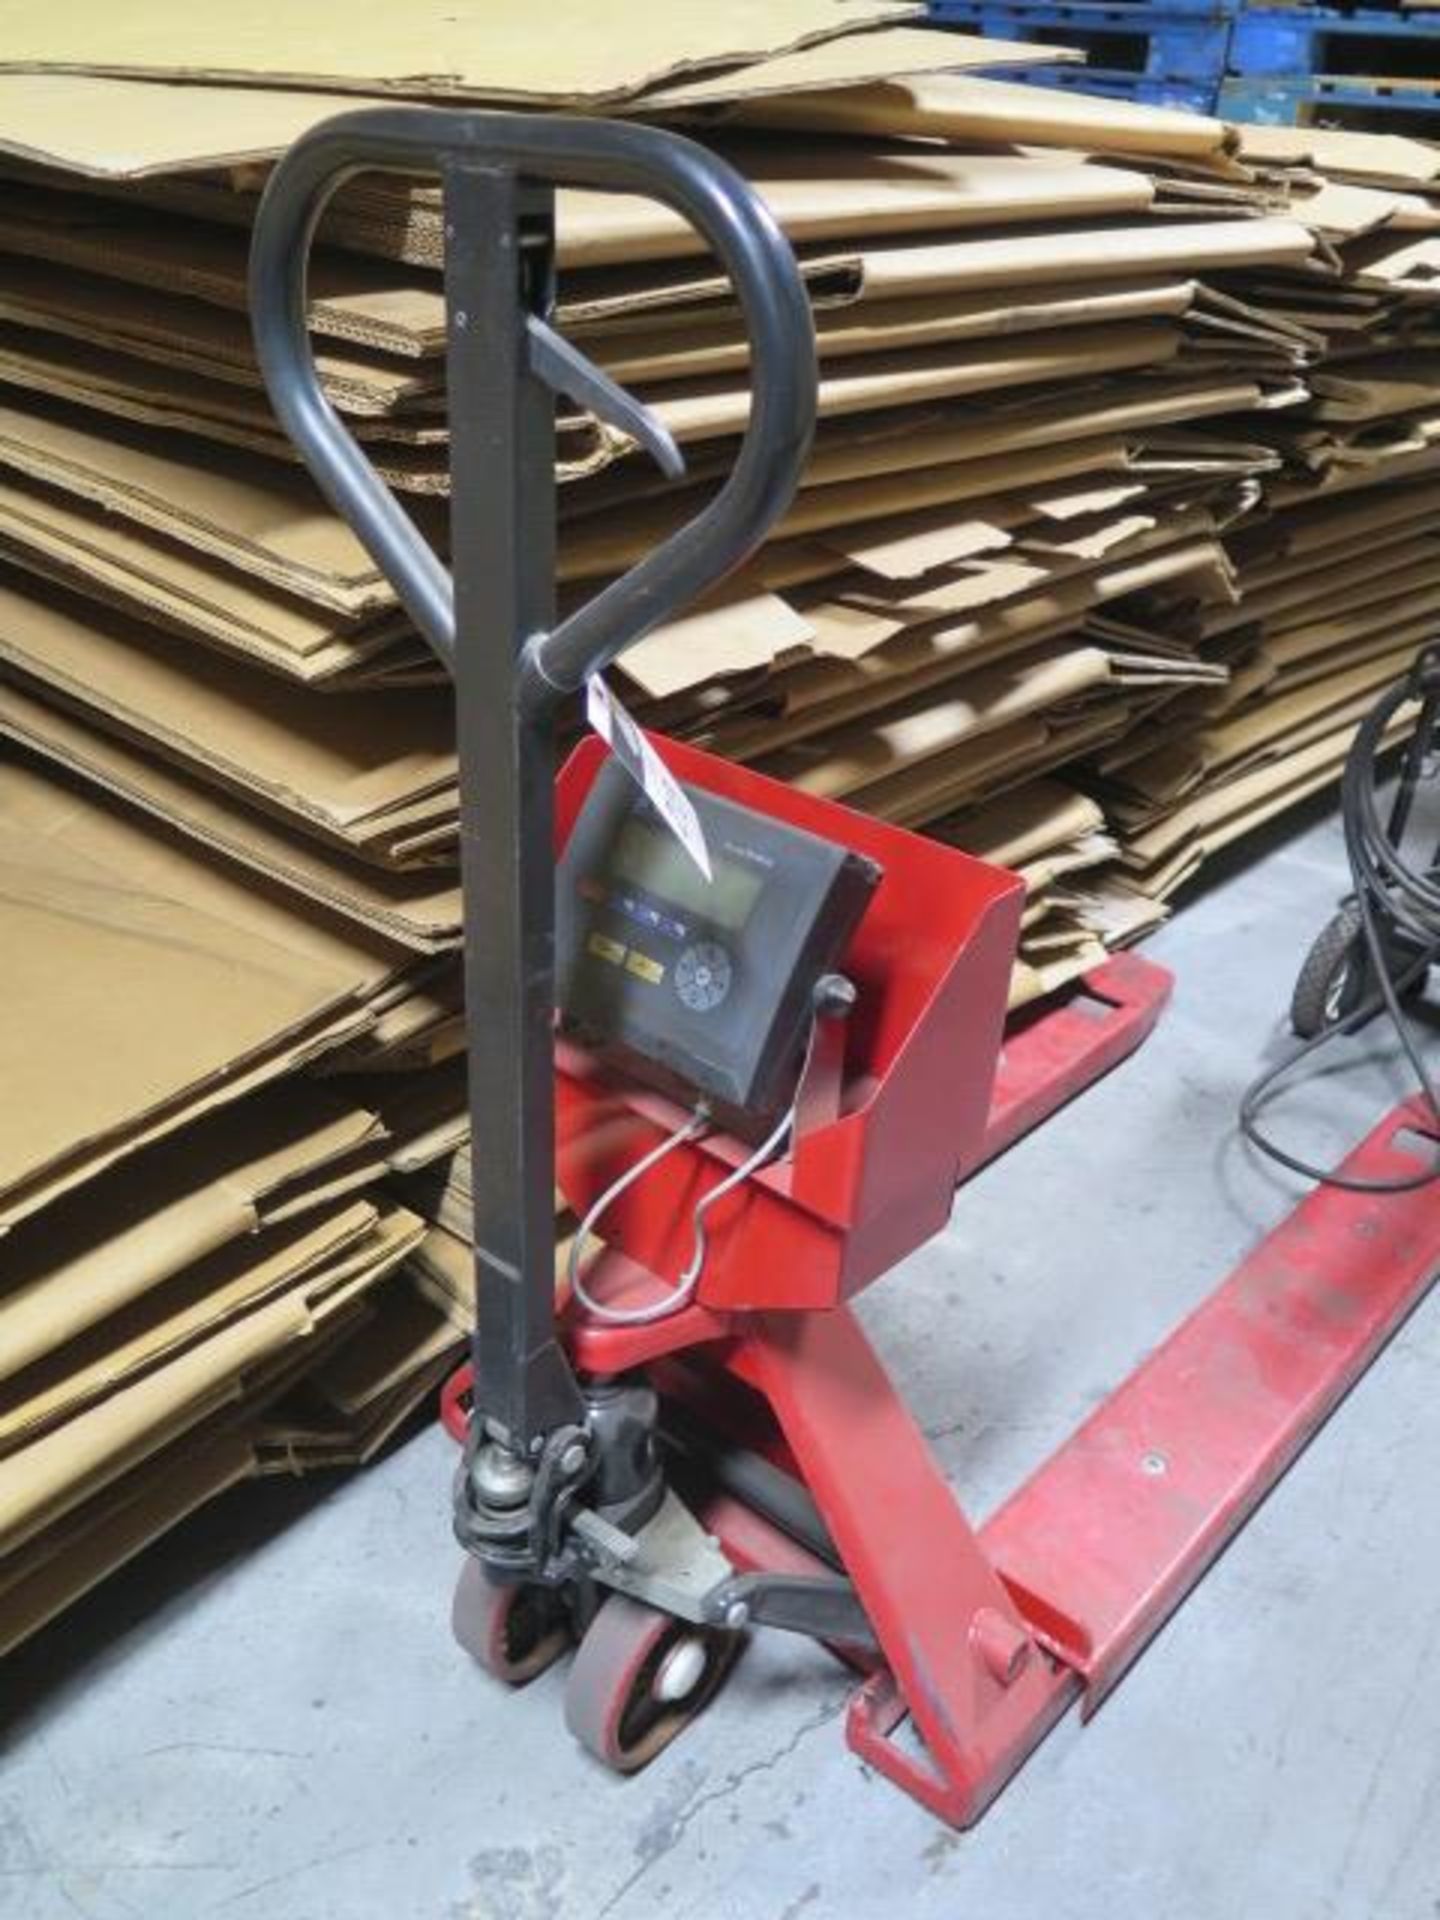 Prime Scale Weighing Pallet Jack w/ mdl. PS-IN103 Digital Scale (SOLD AS-IS - NO WARRANTY) - Image 2 of 5